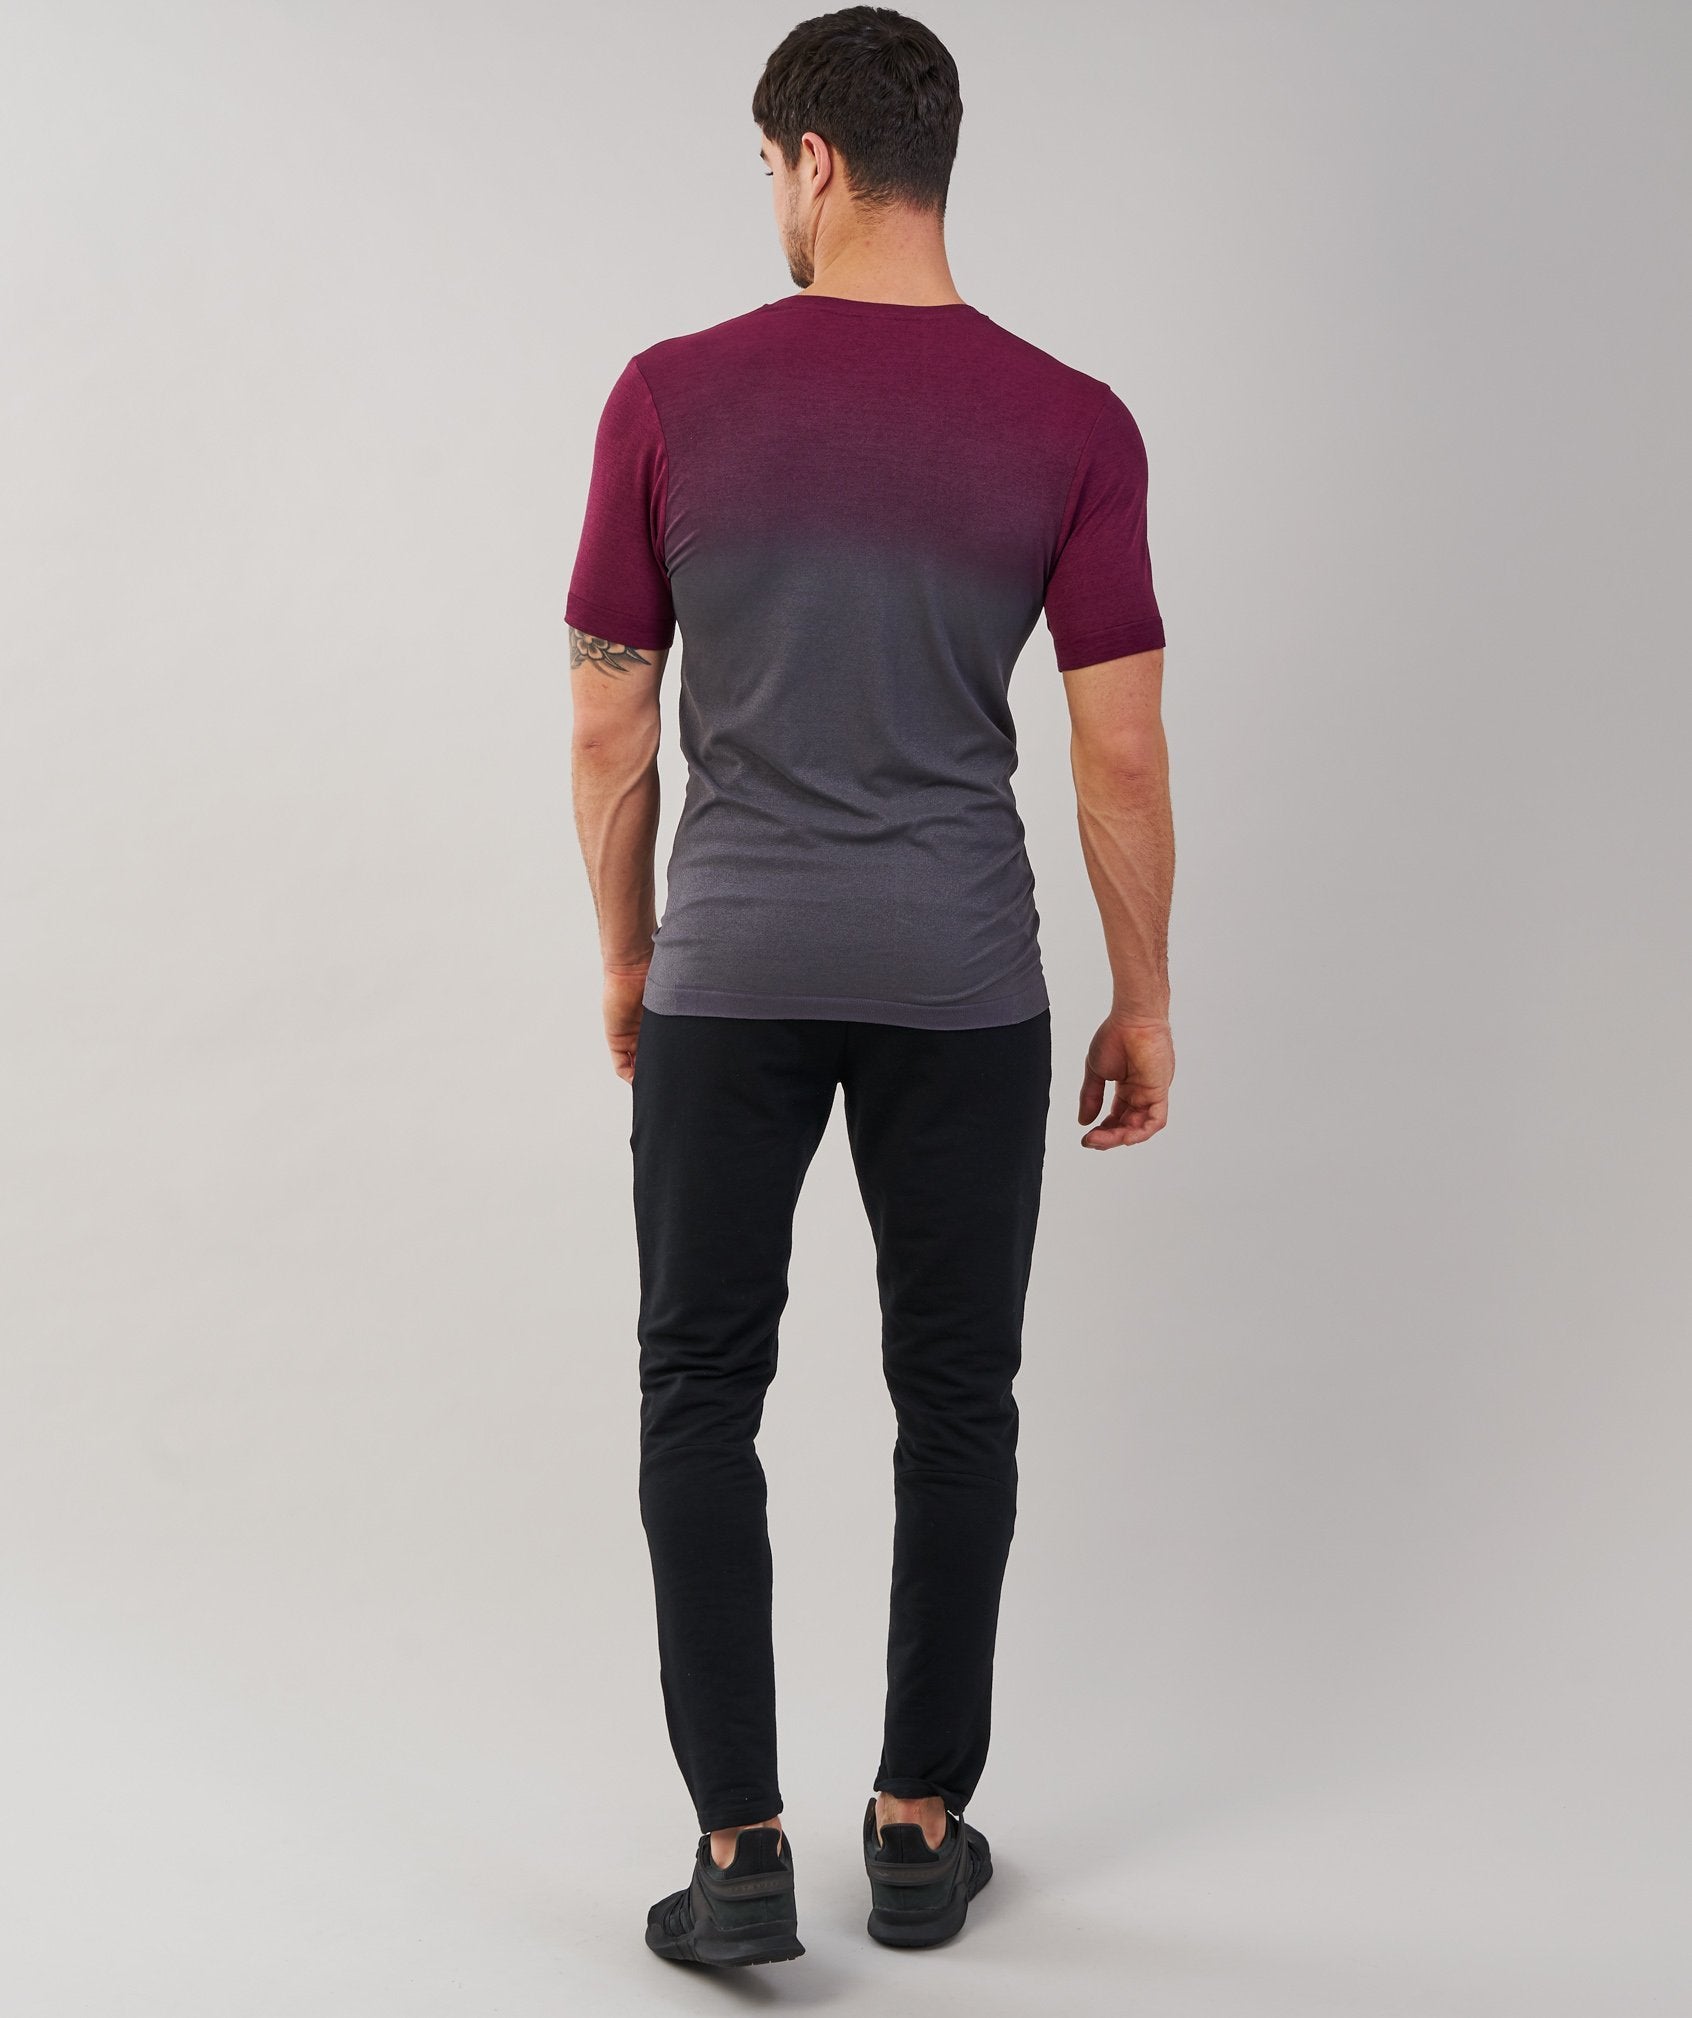 Ombre T-Shirt in Port/Charcoal - view 2